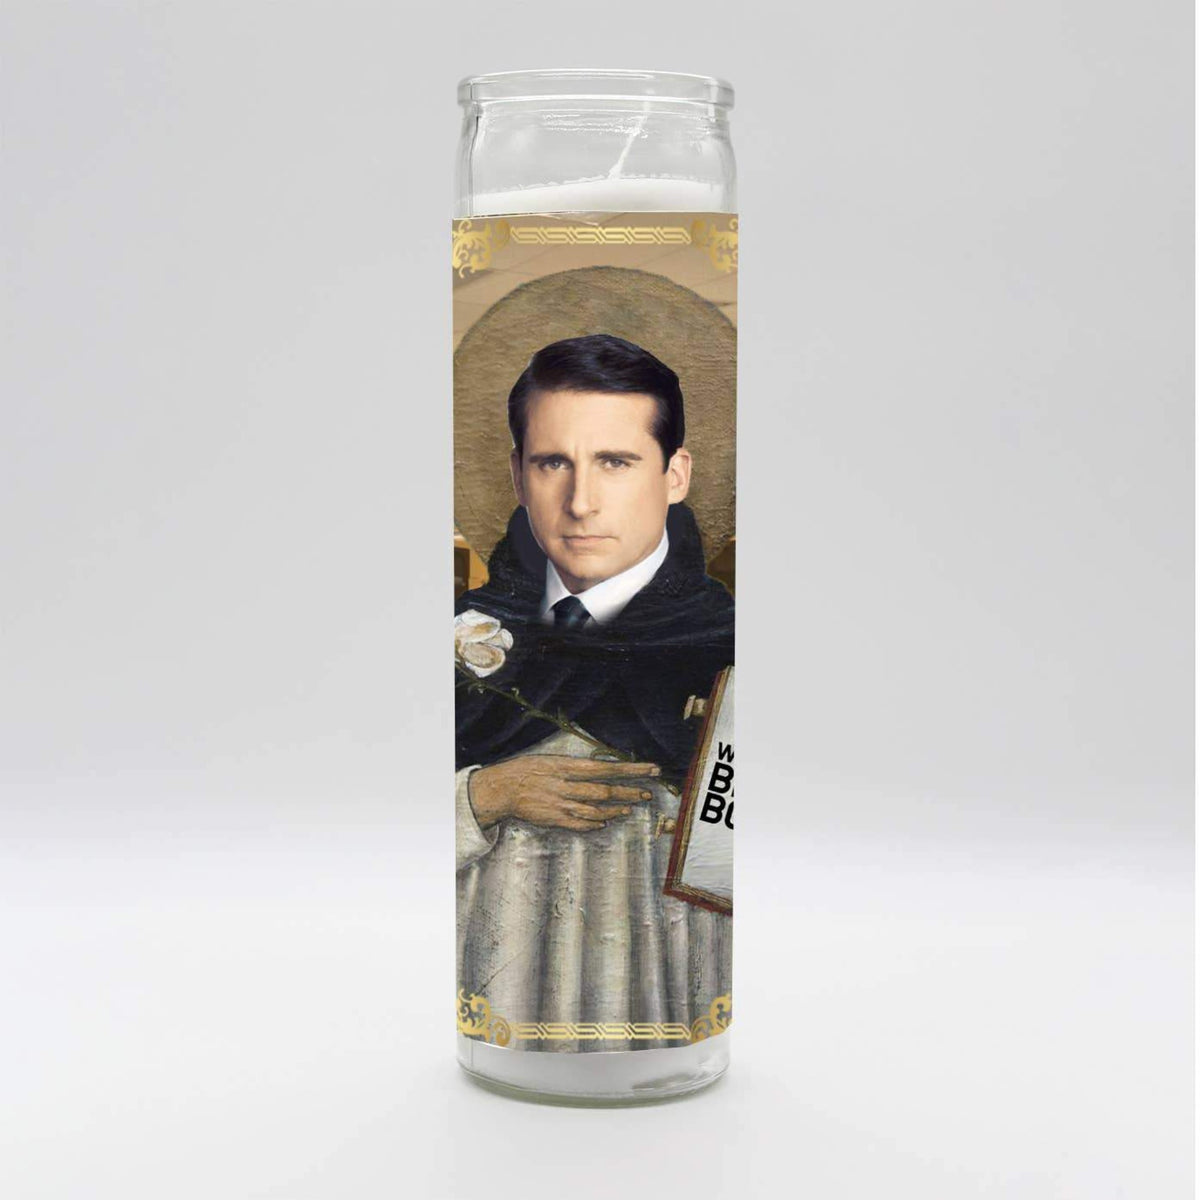 The Office - Michael Scott Candle